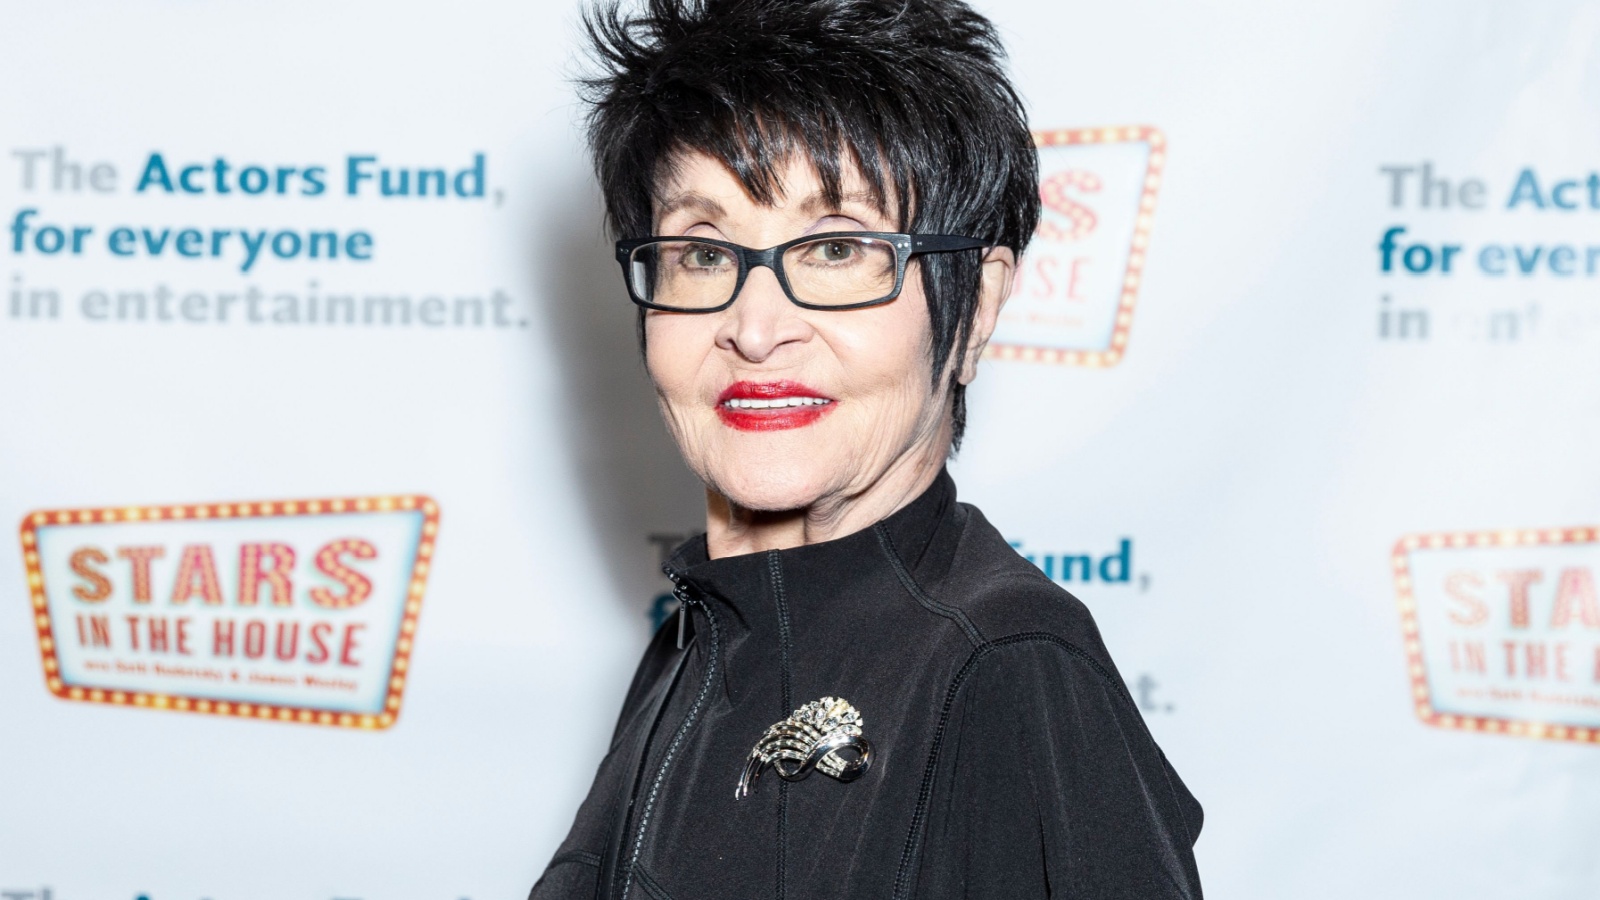 <p><span>Tony Award-winning Broadway performer Chita Rivera died in January 2024. The star had taken a break from performing after experiencing a brief illness before passing at the age of 91. Chita had been on Broadway for over 70 years.</span></p><p><span>Chita had been a part of such hits as <em>West Side Story</em>, <em>Guys and Dolls</em>, <em>Can-Can</em>, <em>Merlin</em>, and <em>Kiss of the Spider Woman</em>. She received two Tony awards and The Presidential Medal of Freedom from former president Barack Obama.</span></p><p><a class="theme markdown__link" href="https://www.msn.com/en-us/channel/source/Movie%20Nights/sr-vid-d3yx0j8wg3fdqxaqdfi2763g5nci5pve998s6wqpatsfh409wnvs" rel="noopener noreferrer">Follow us on MSN to see more of our exclusive entertainment content.</a></p>